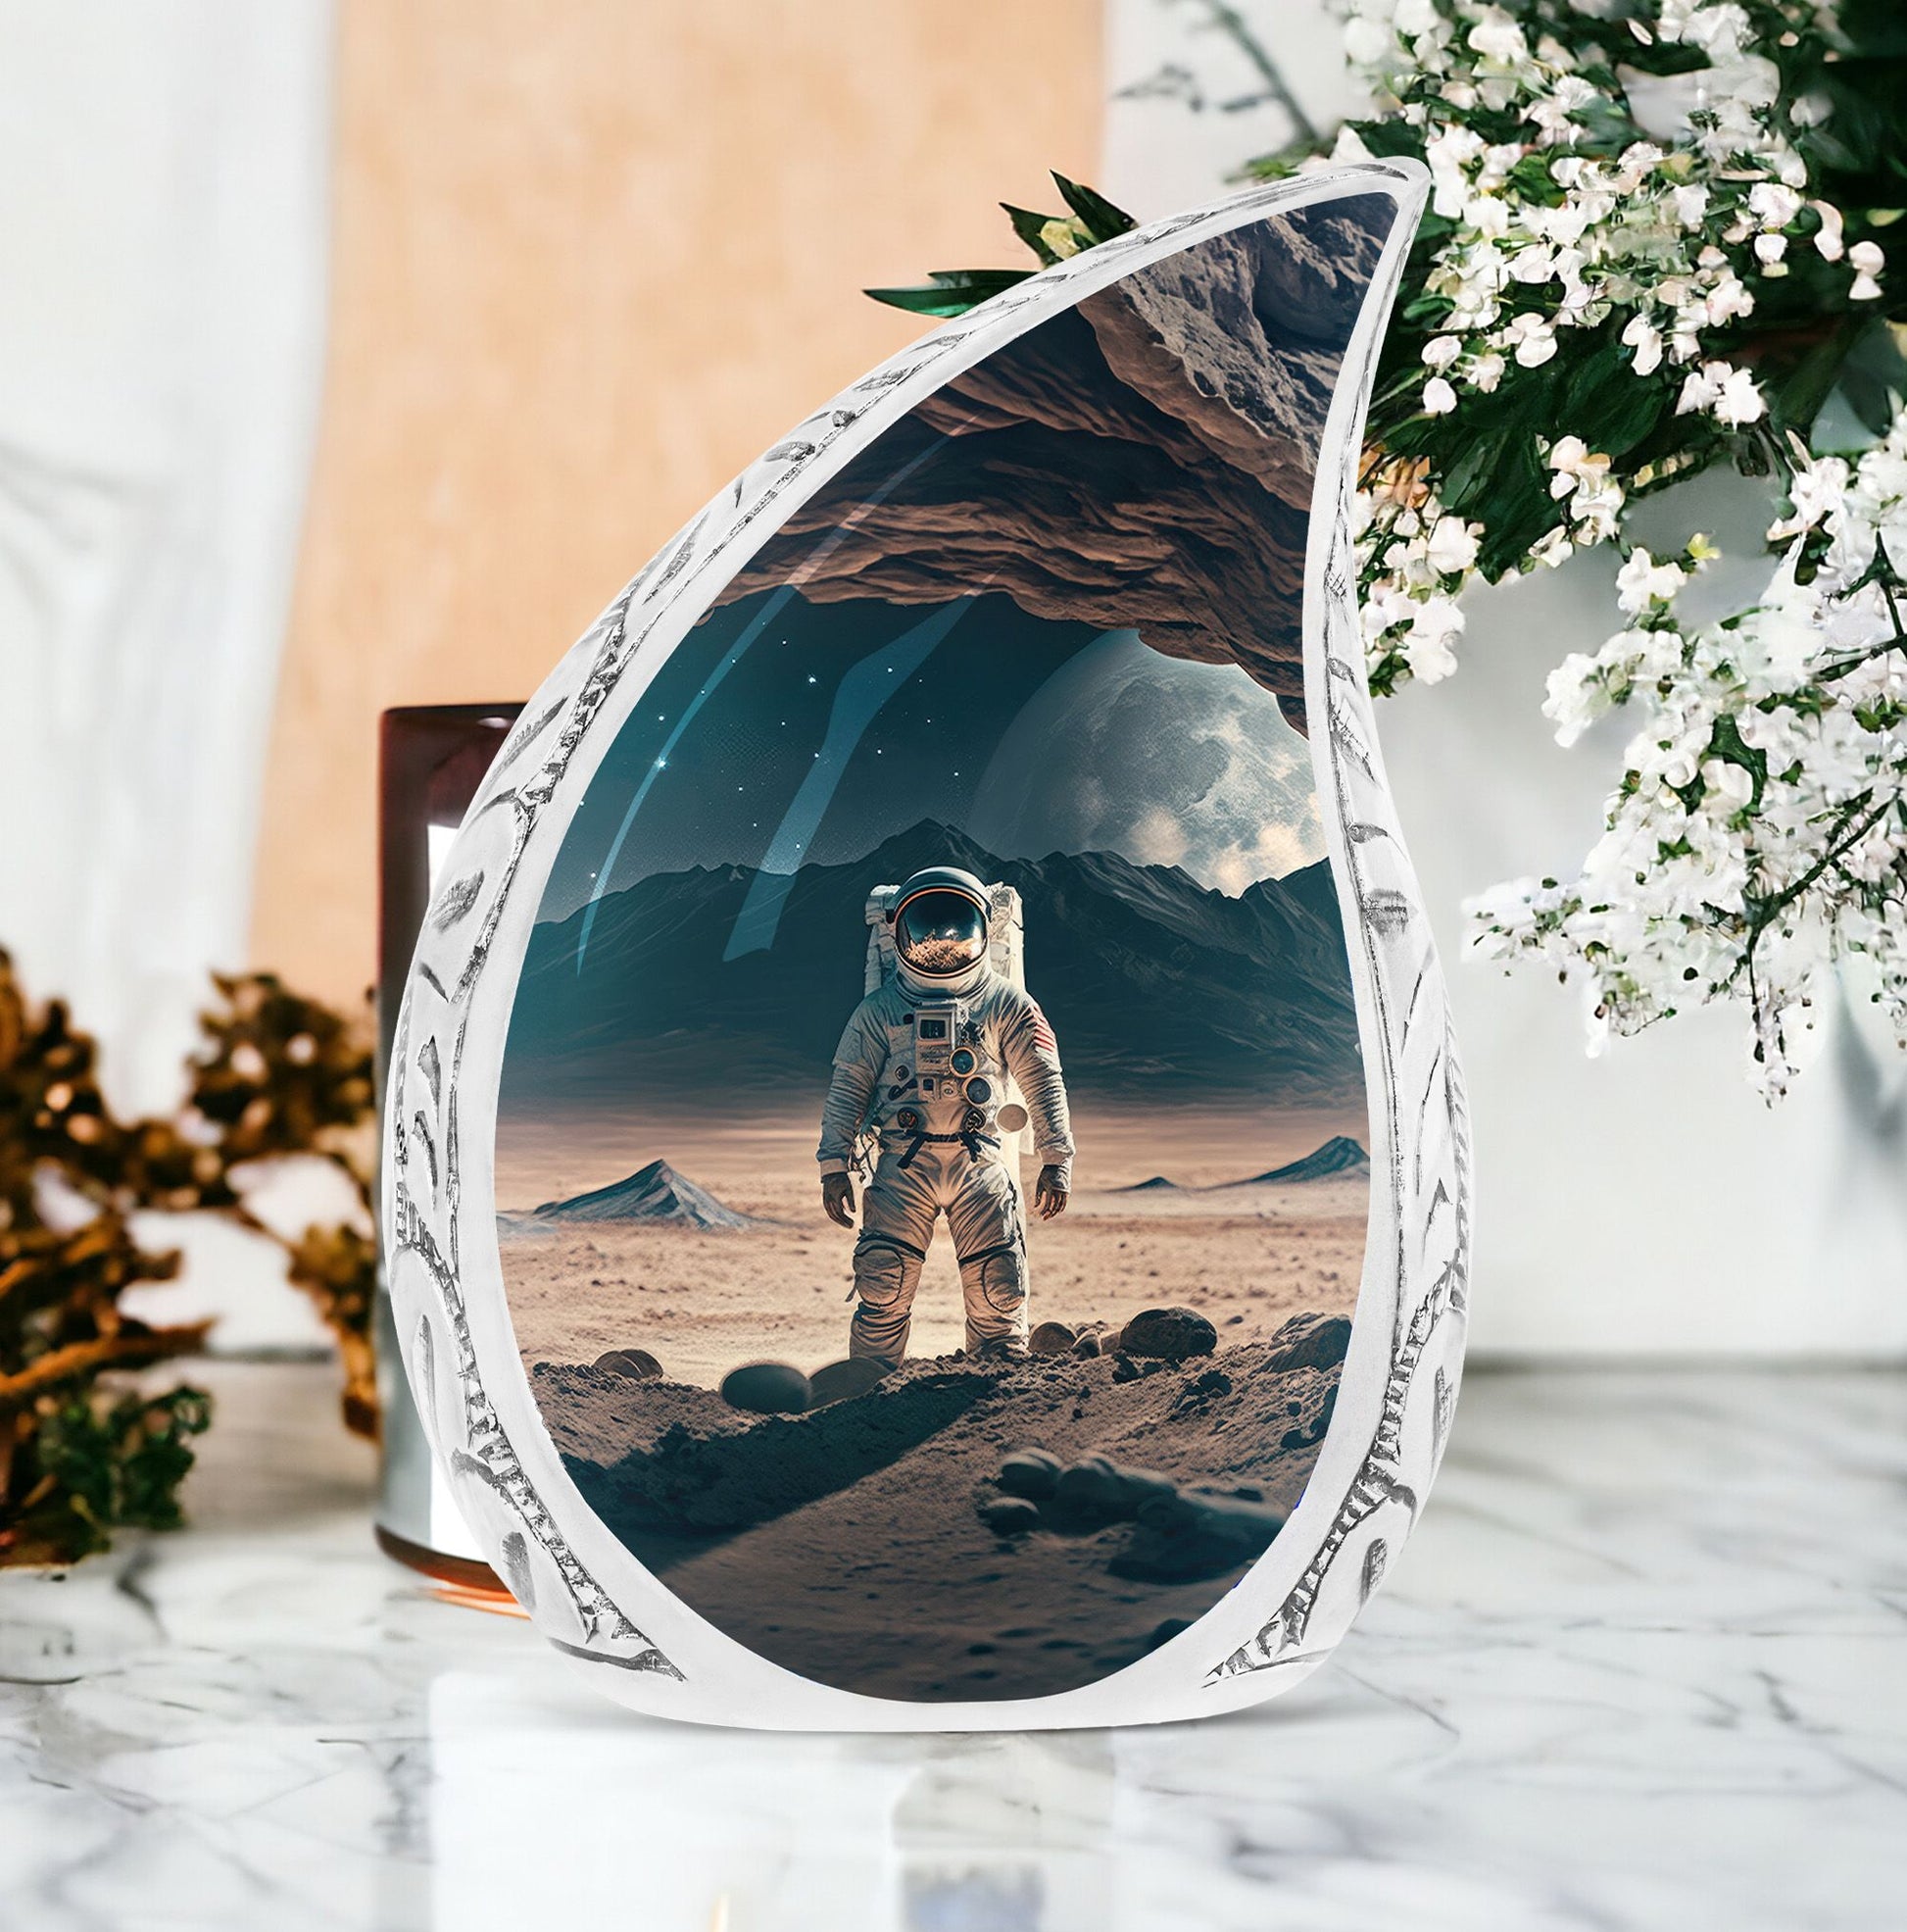 Large burial urn for adult human ashes with an astronaut in open space illustration design